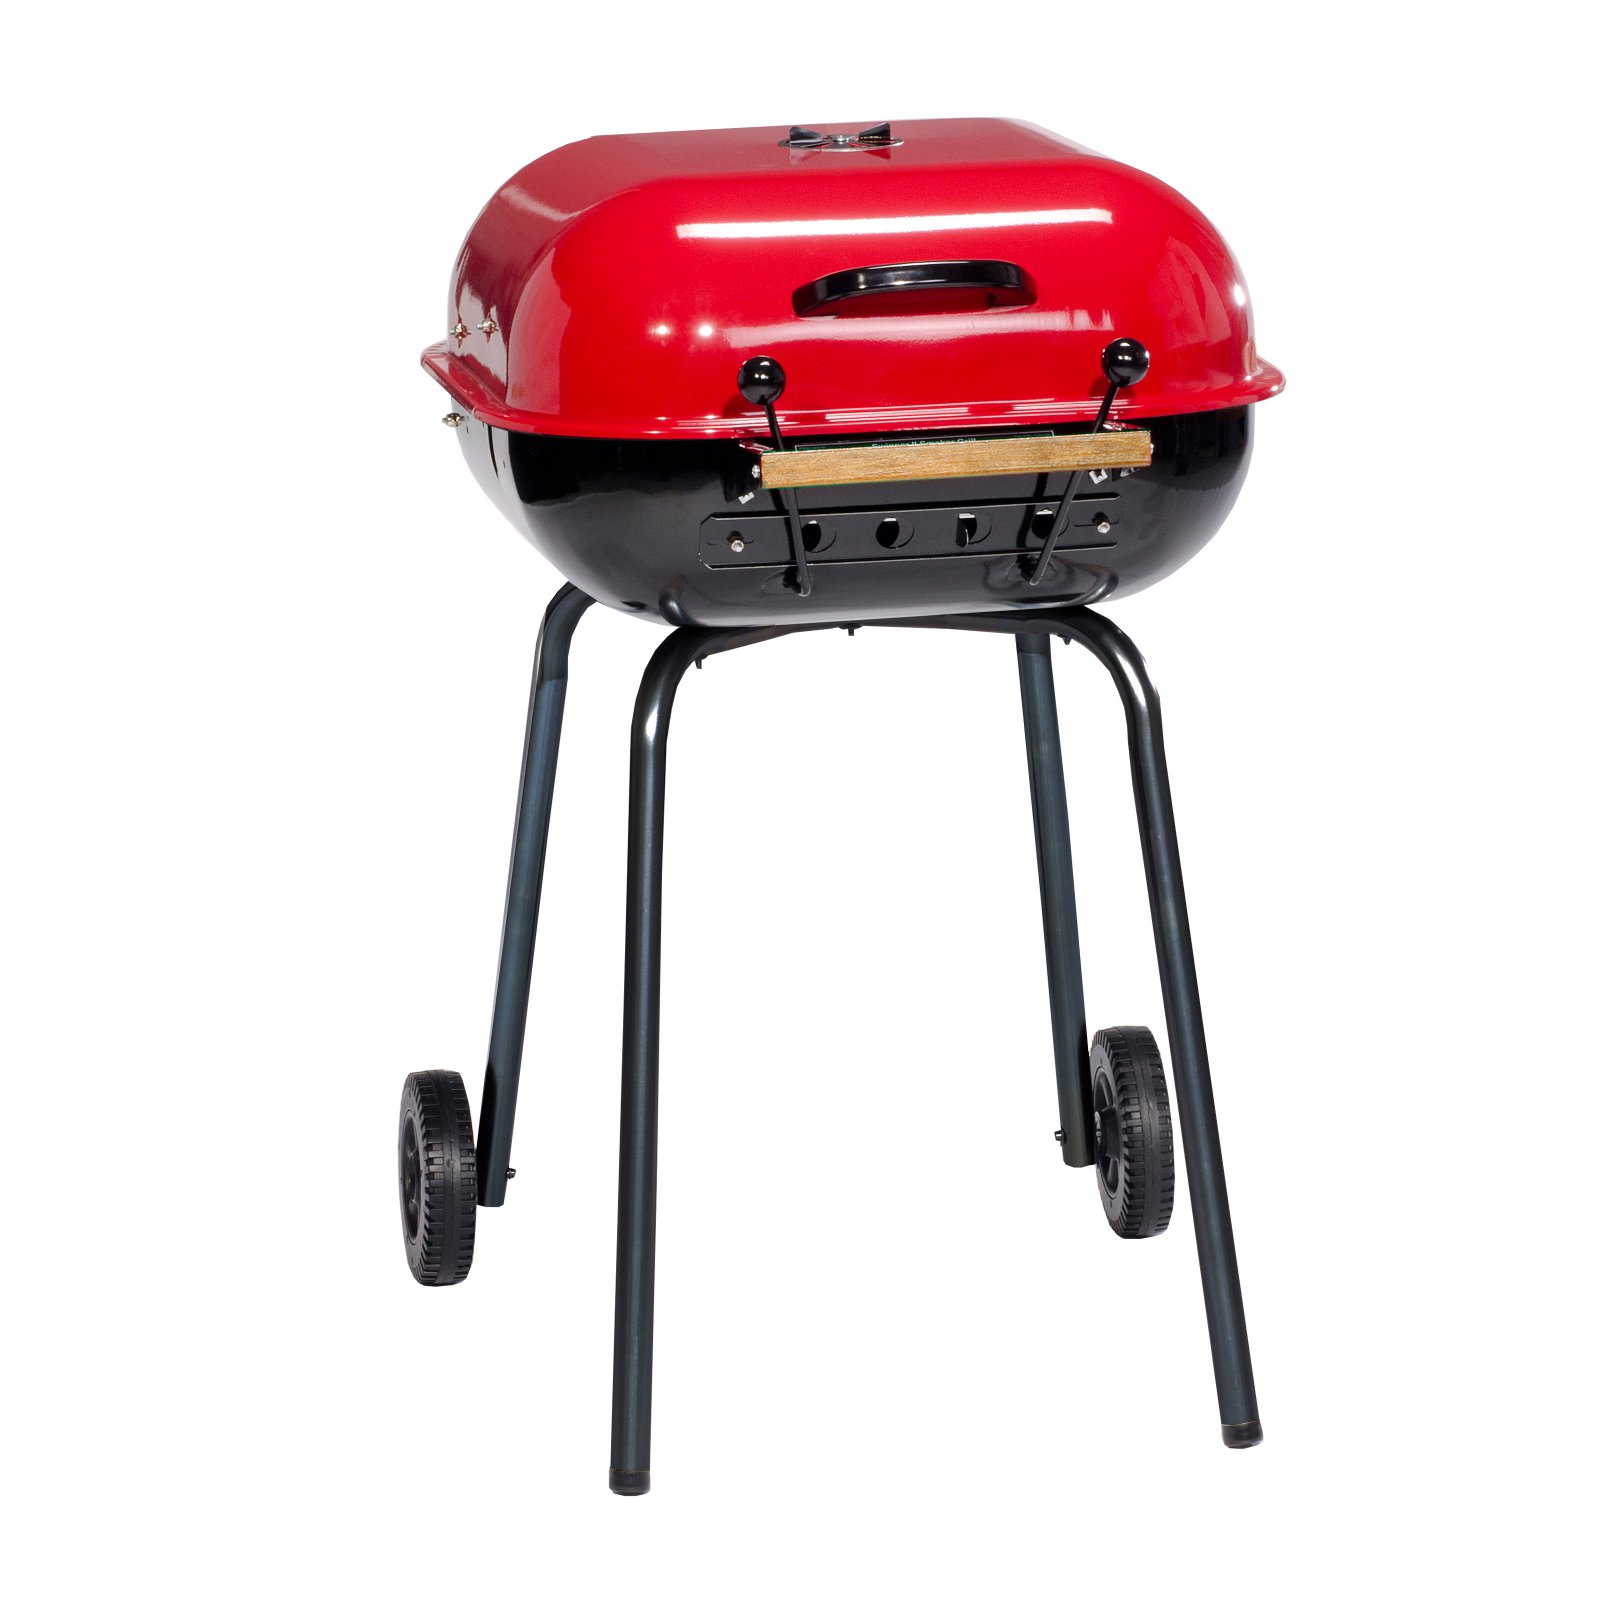 Americana Swinger 6 Position Charcoal Grill - image 5 of 8